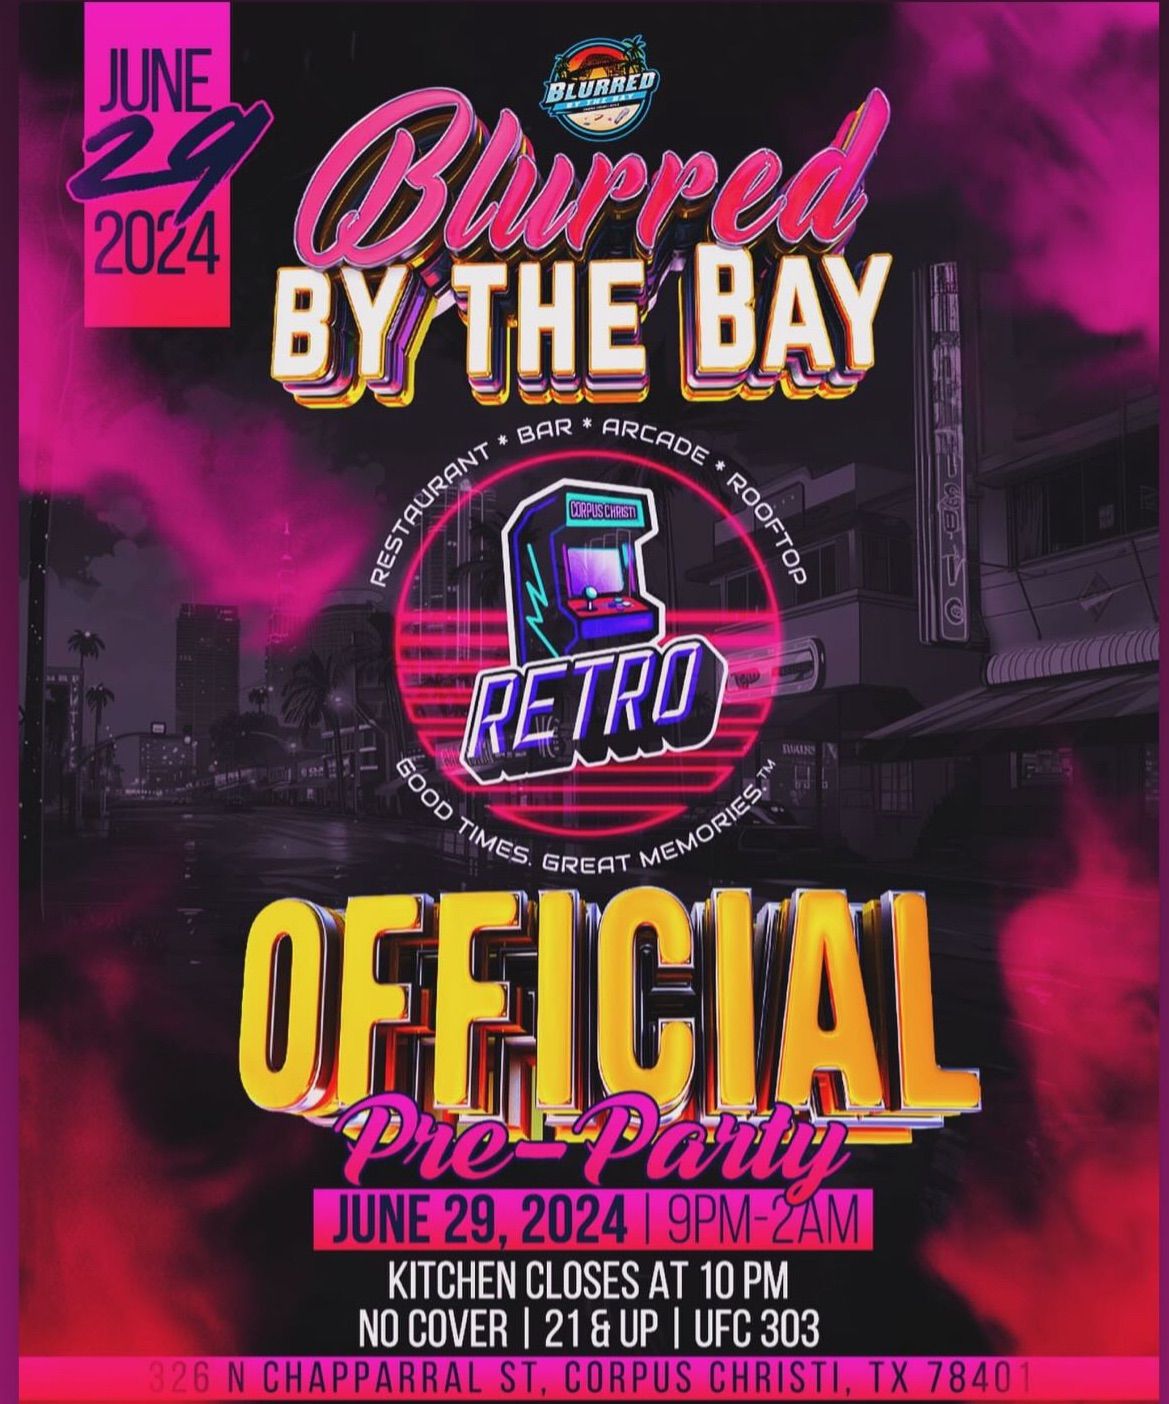 Blurred by the Bay - Official Rooftop Pre-Party